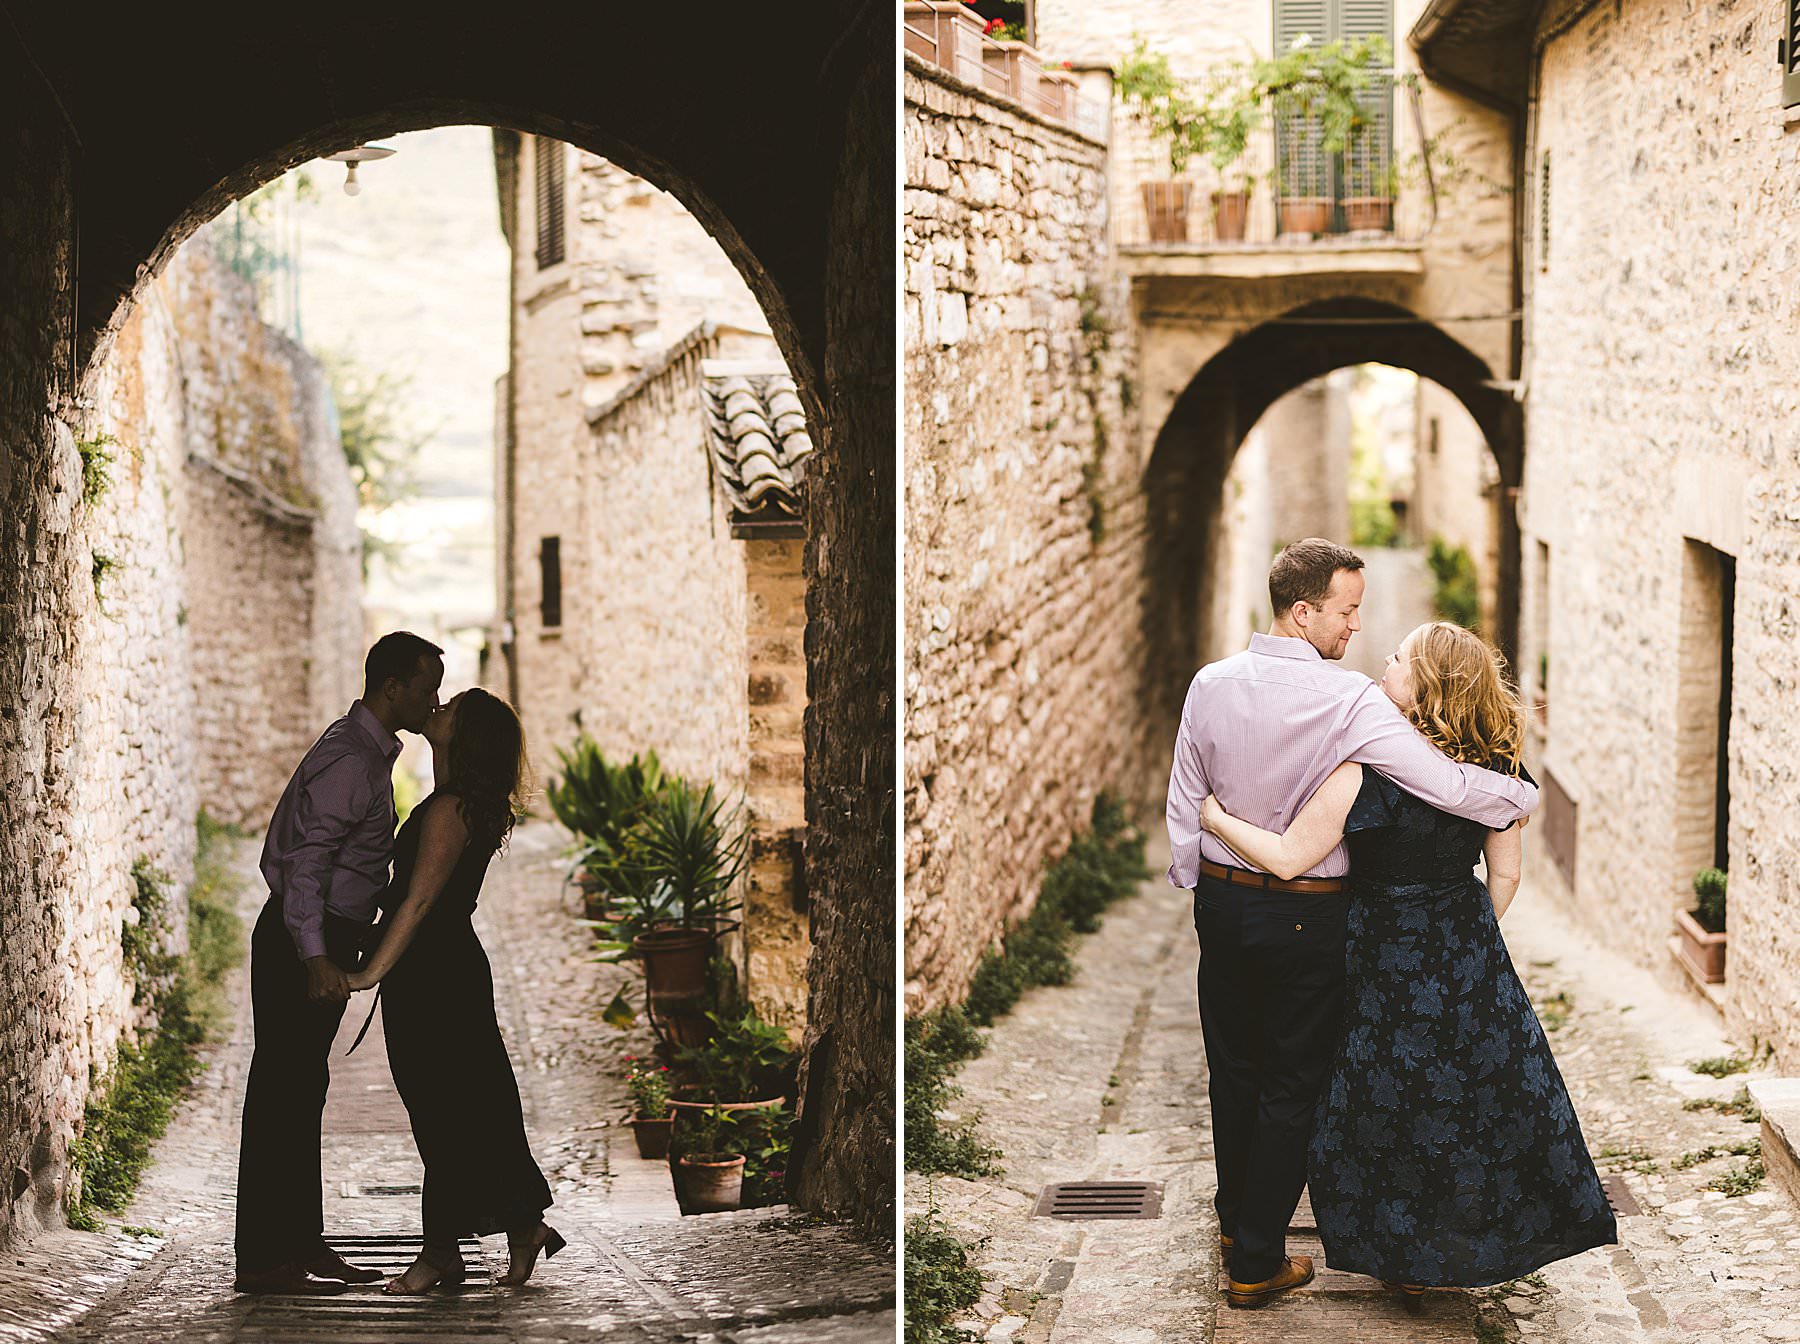 Spello, Umbria, the perfect setting for a romantic and unforgettable engagement photo shoot